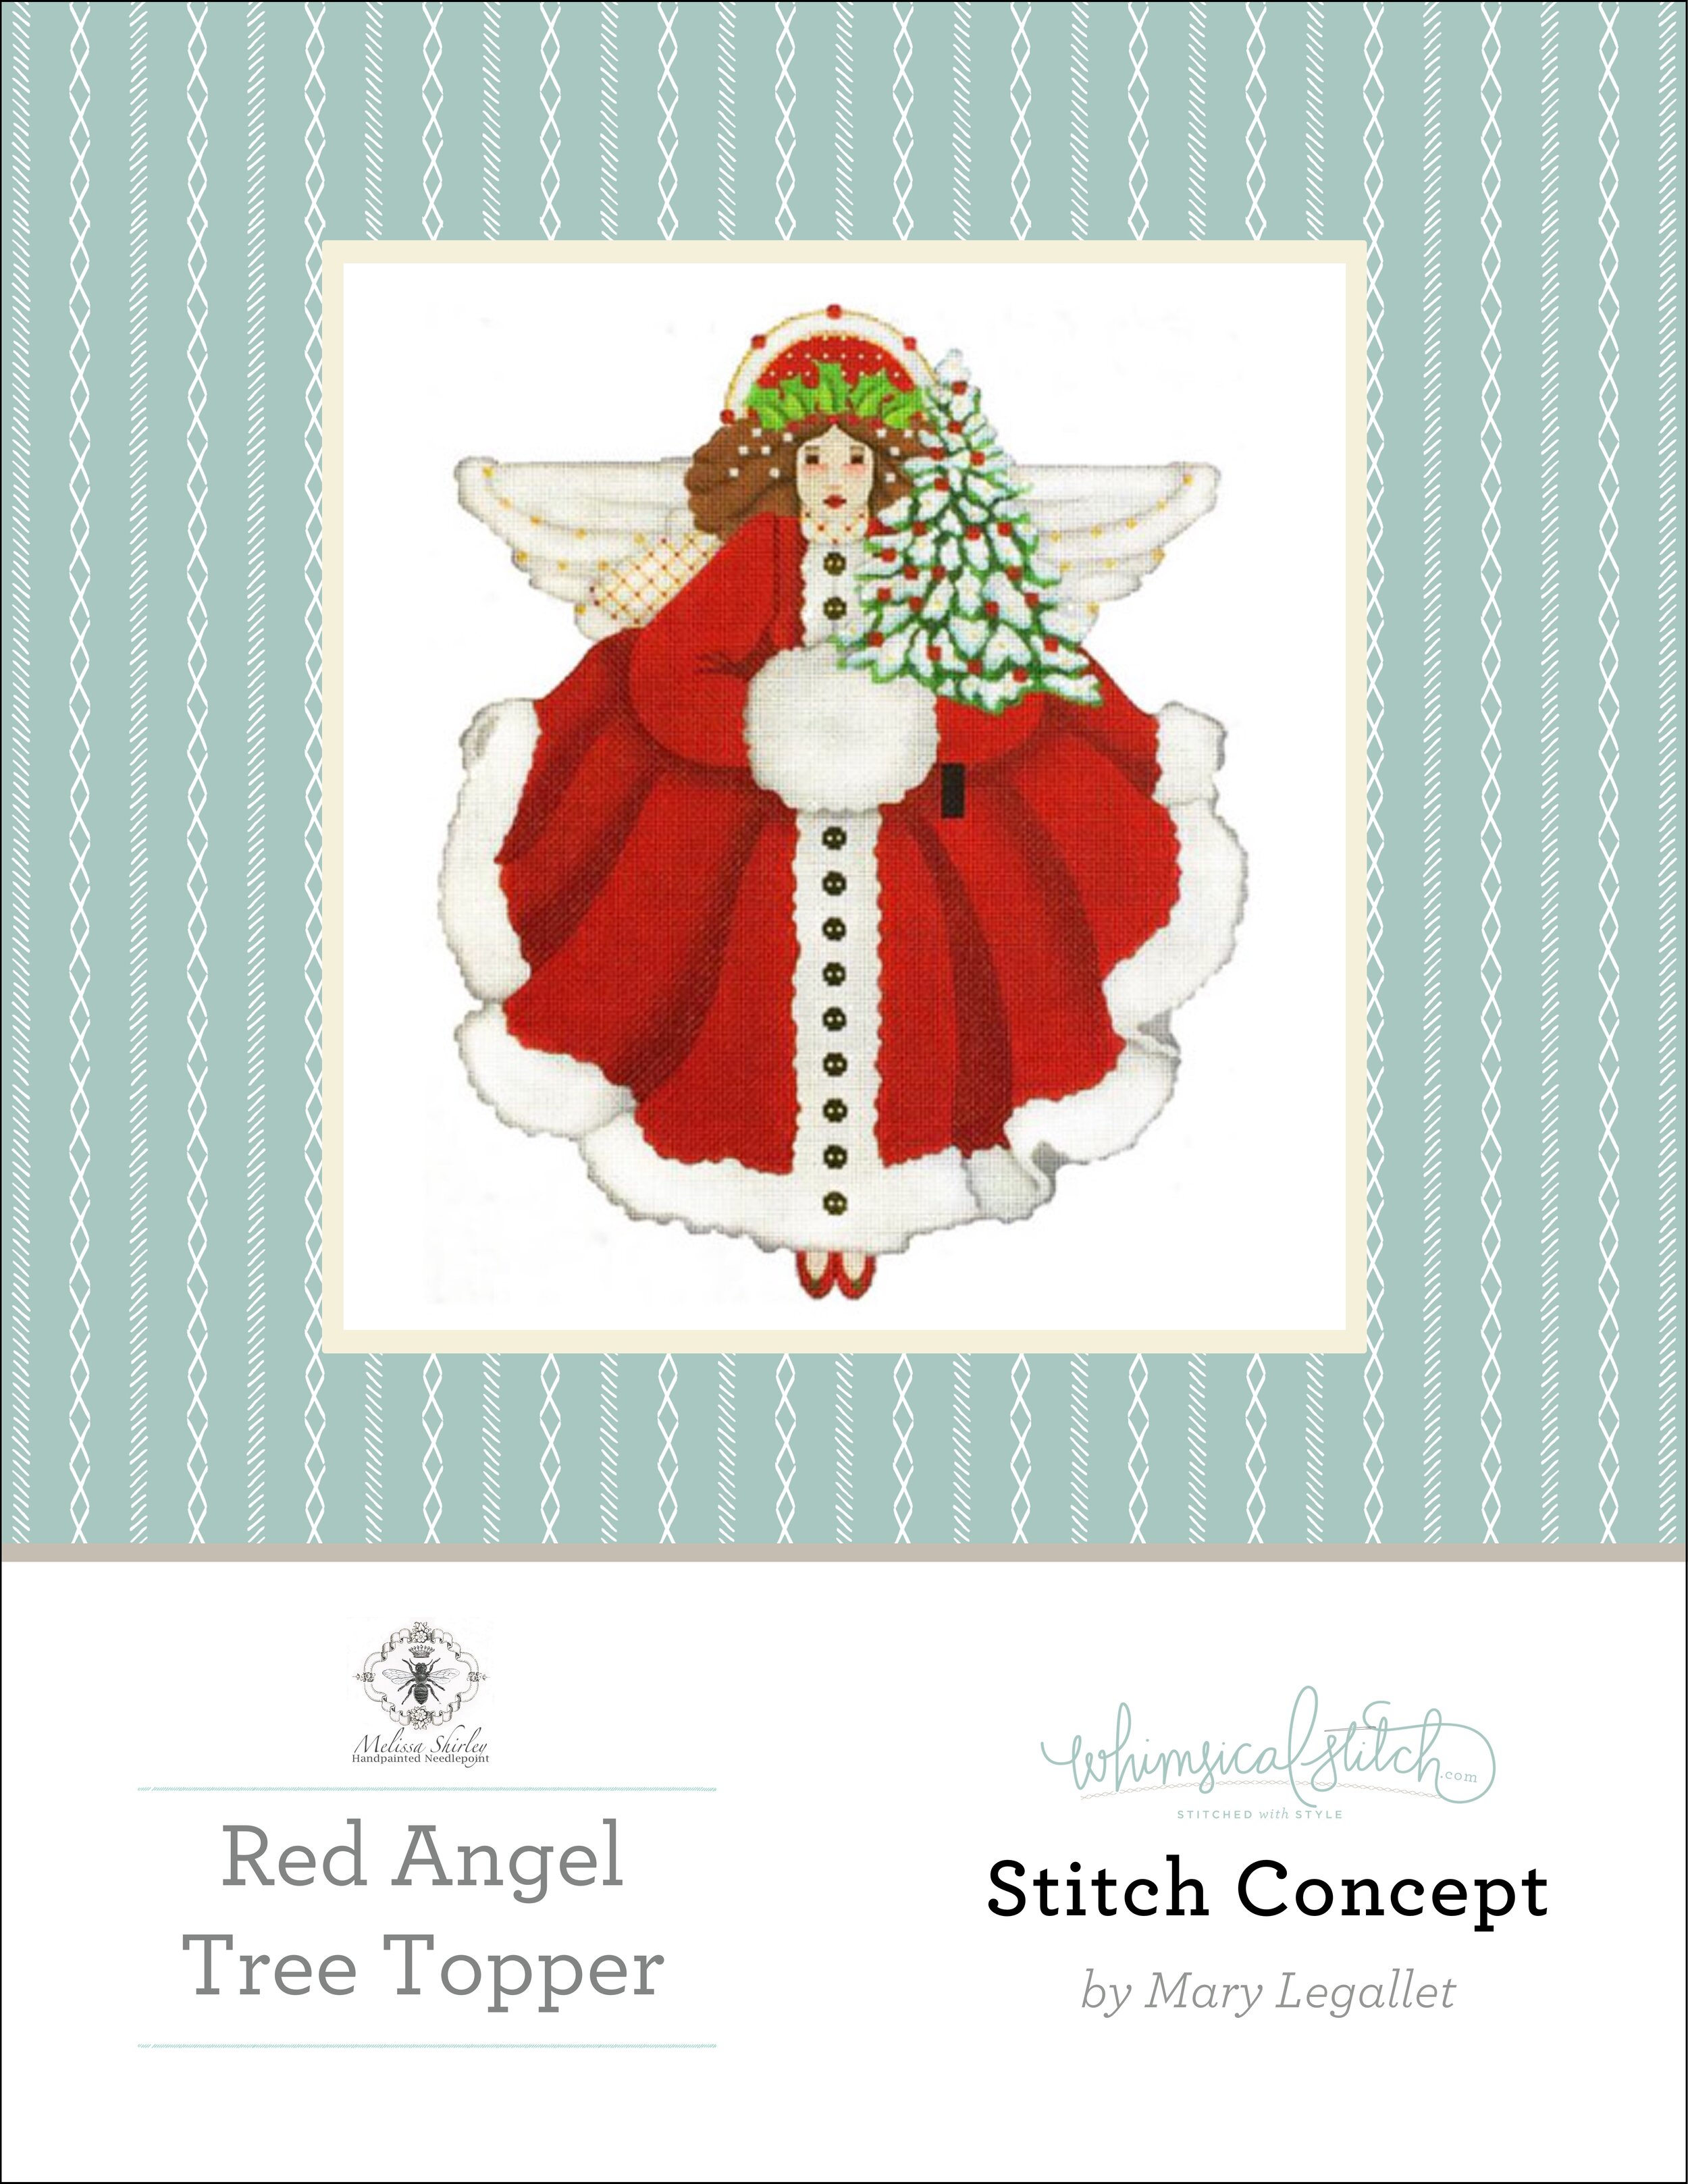 Red Angel Tree Topper